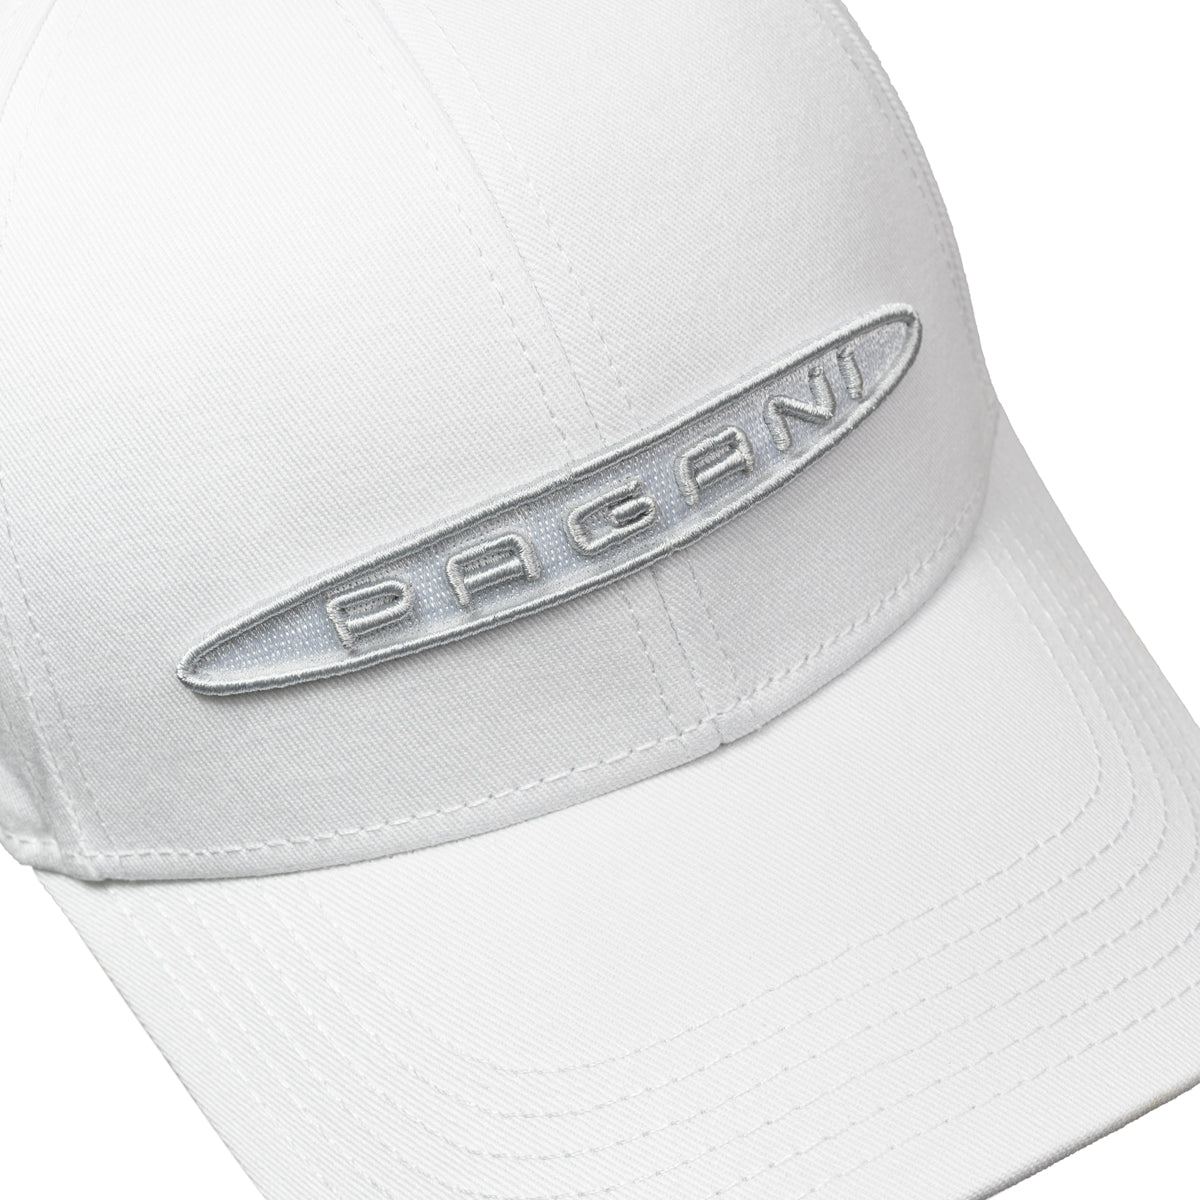 Cappellino basic bianco | Team Collection